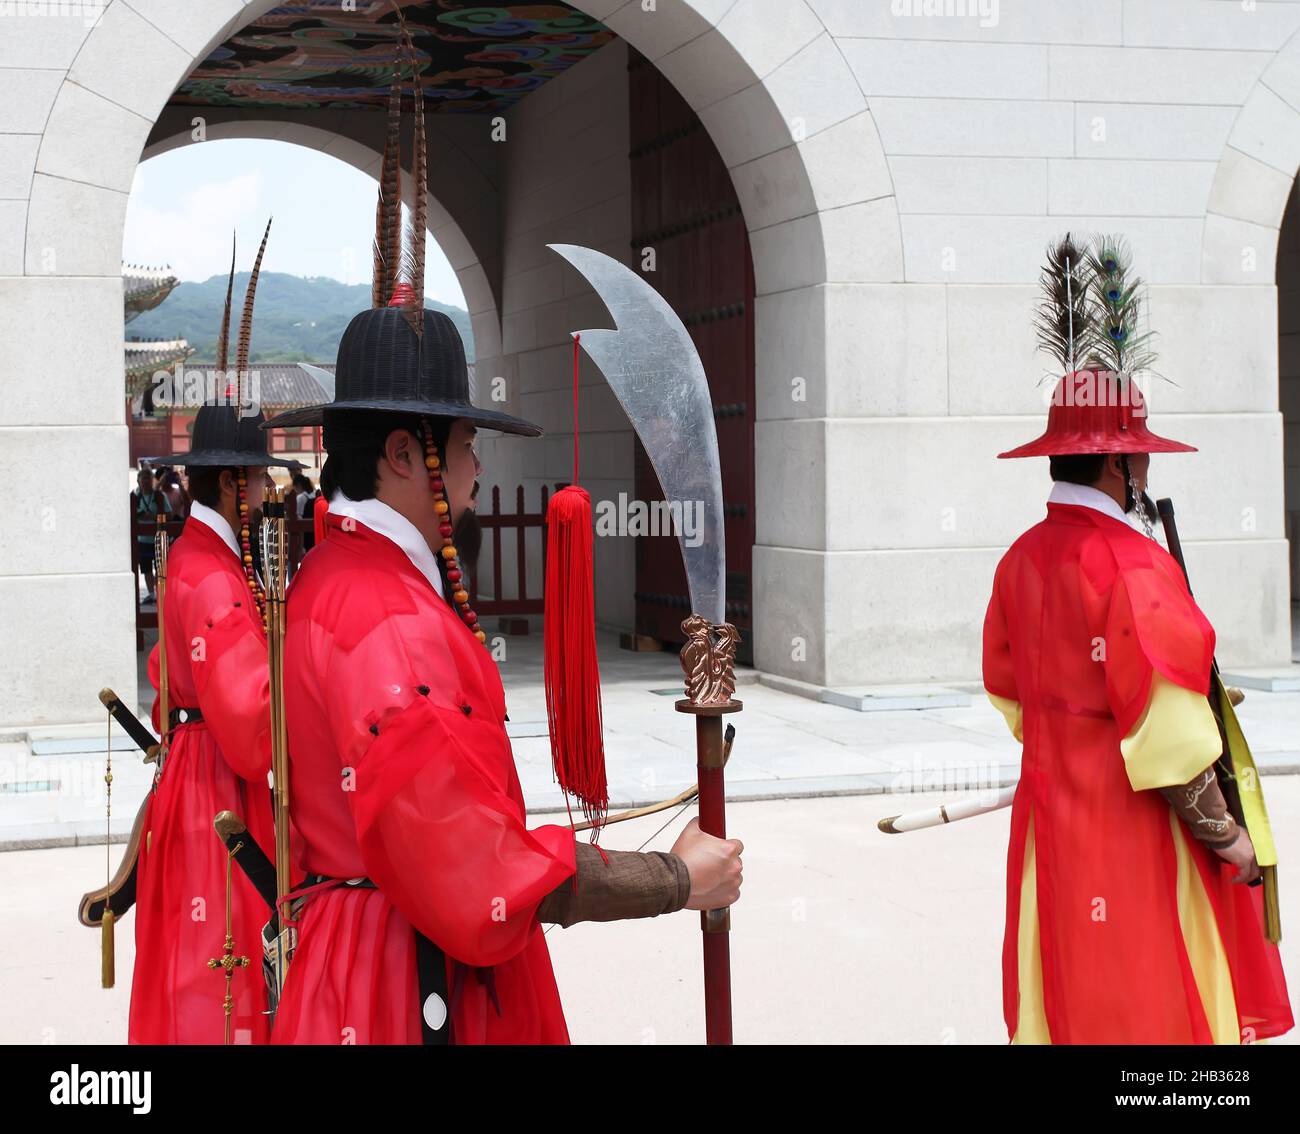 Changing of the Royal Guards Ceremony at the Gwanghwamun Gate at the Gyeongbokgung Palace in Seoul, South Korea. Stock Photo